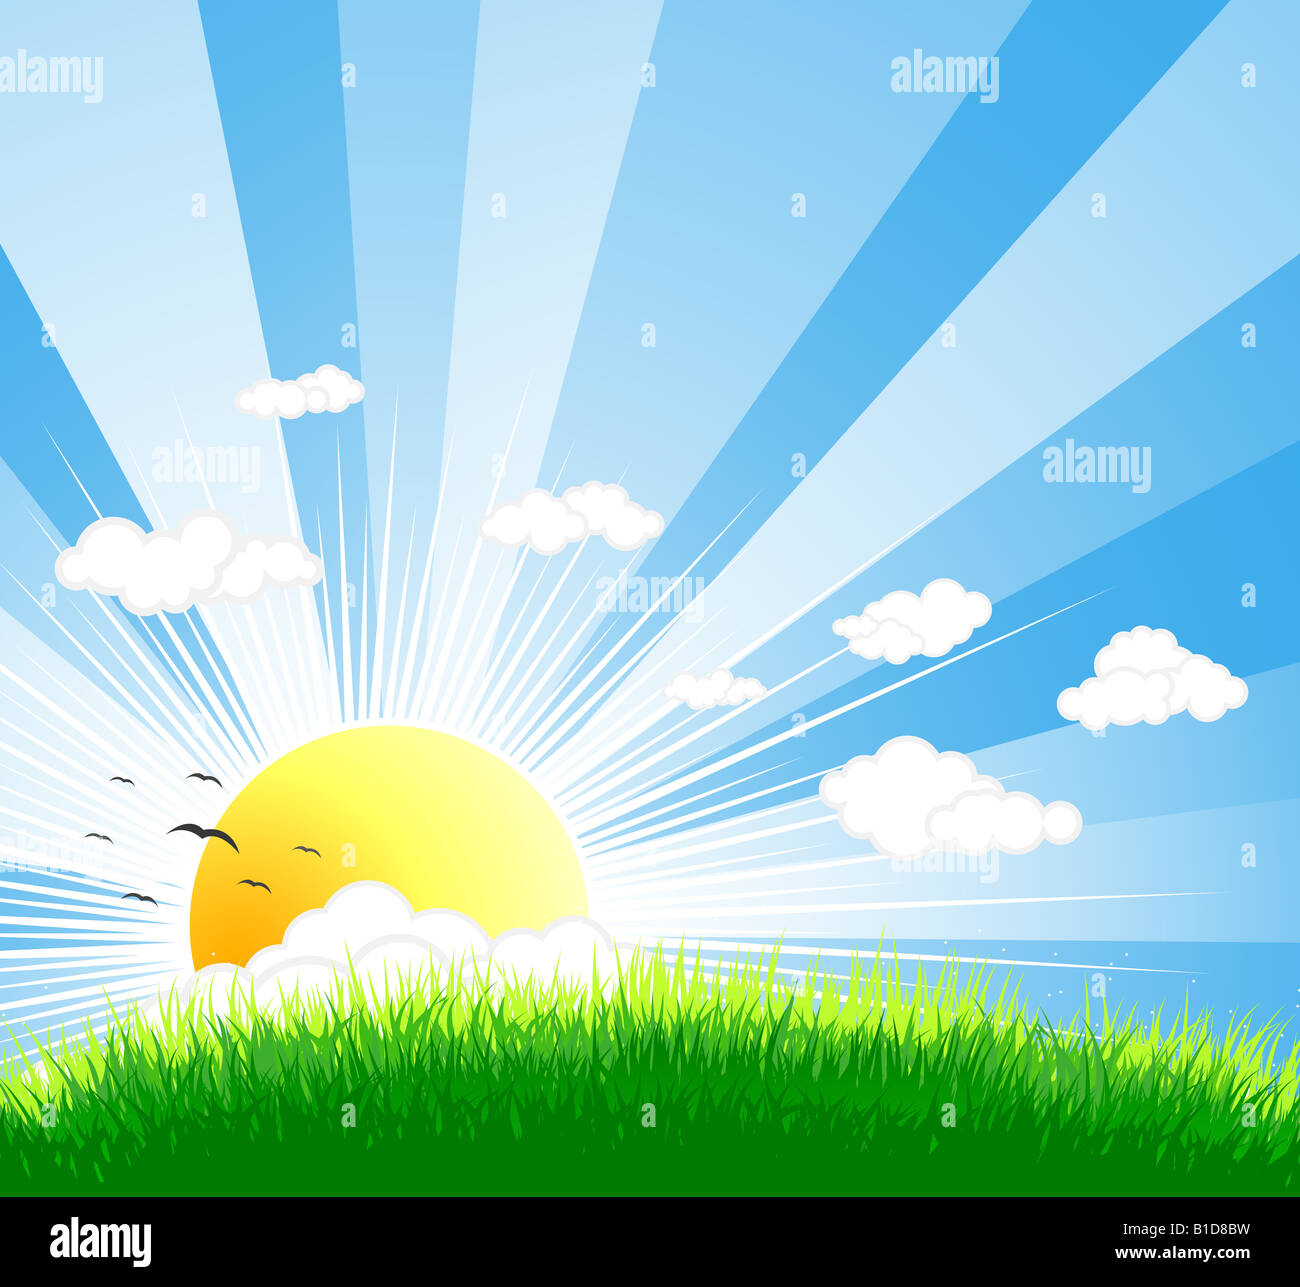 Vector illustration of an idyllic sunny nature background with a blue gradient stripes sky birds green grass layers of grass Stock Photo